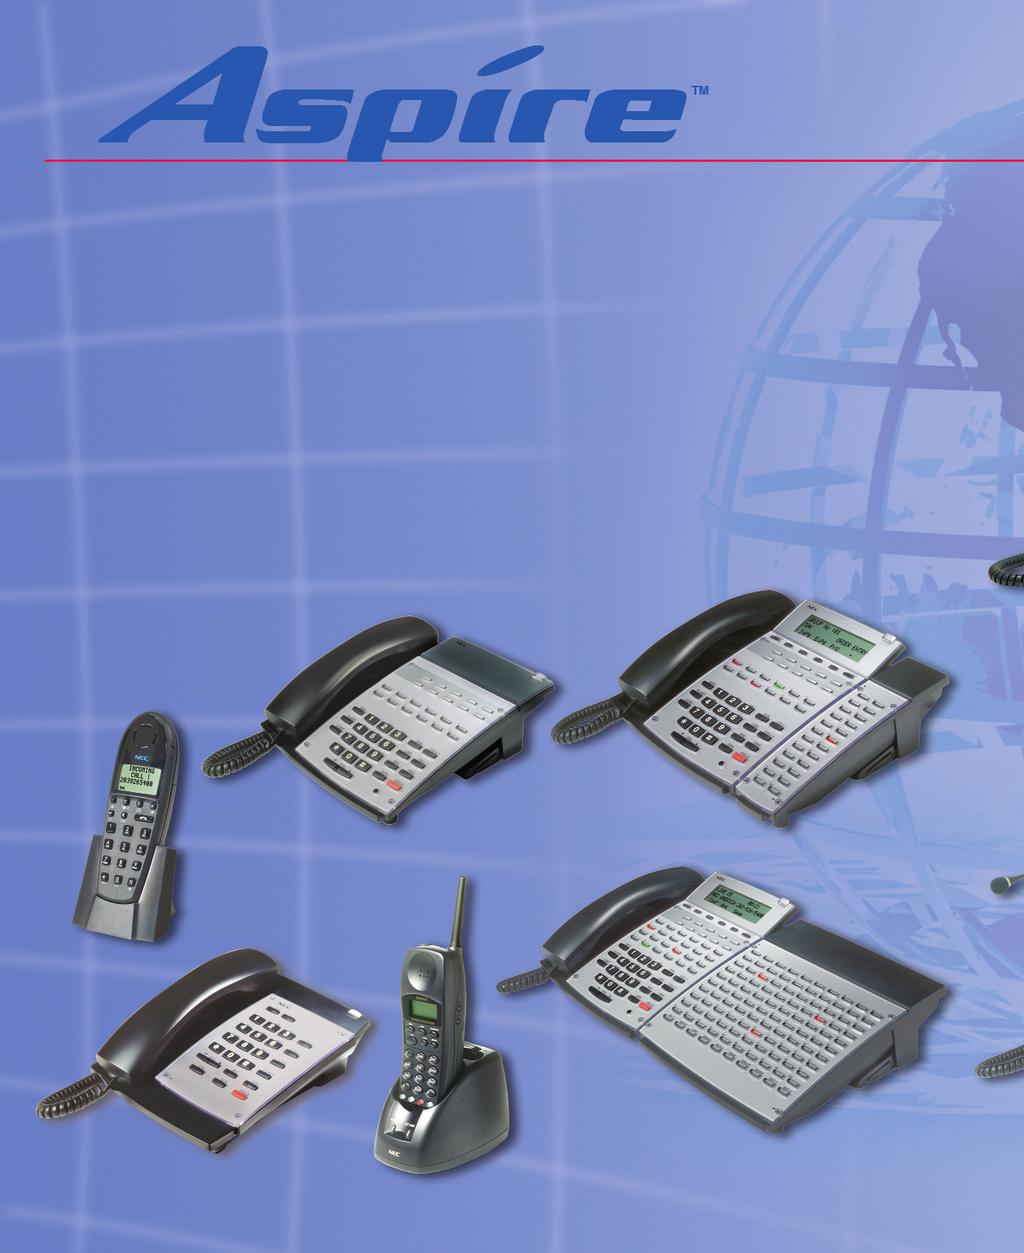 Aspire is an attractive addition to any work environment. With many models to choose from, each station user can enjoy customized service and performance.